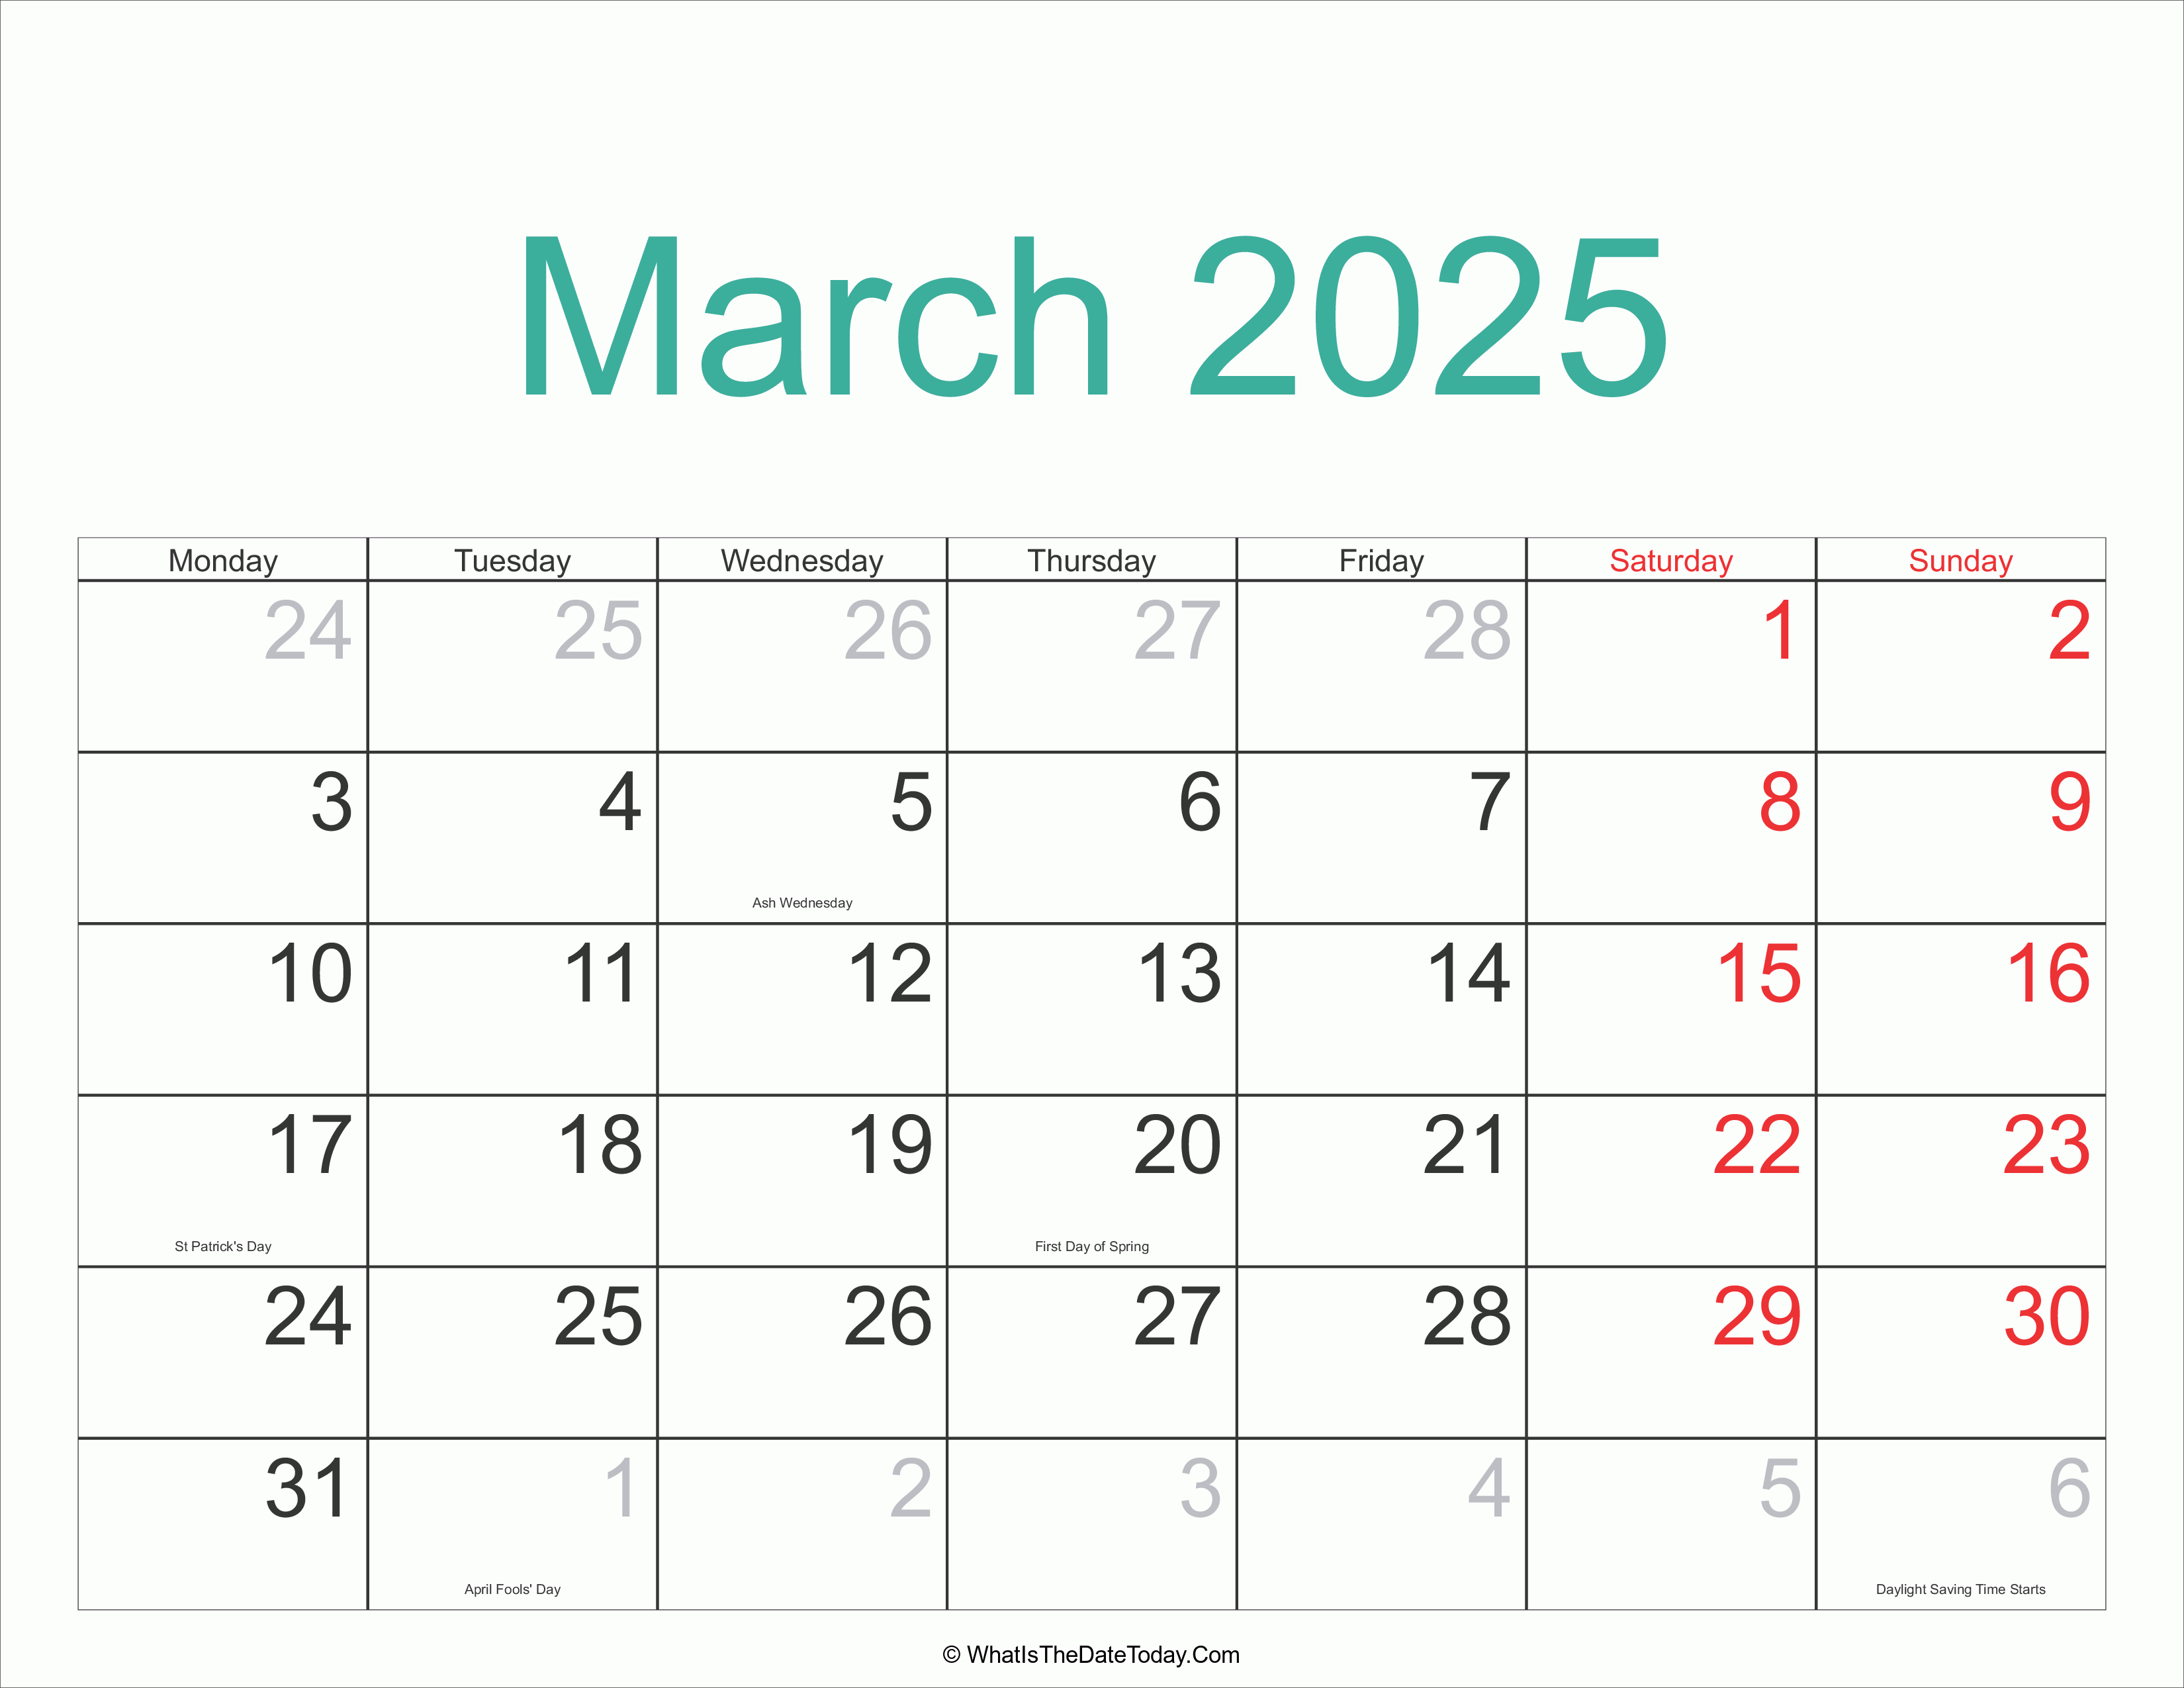 March 2025 Calendar Printable with Holidays  Whatisthedatetoday.Com